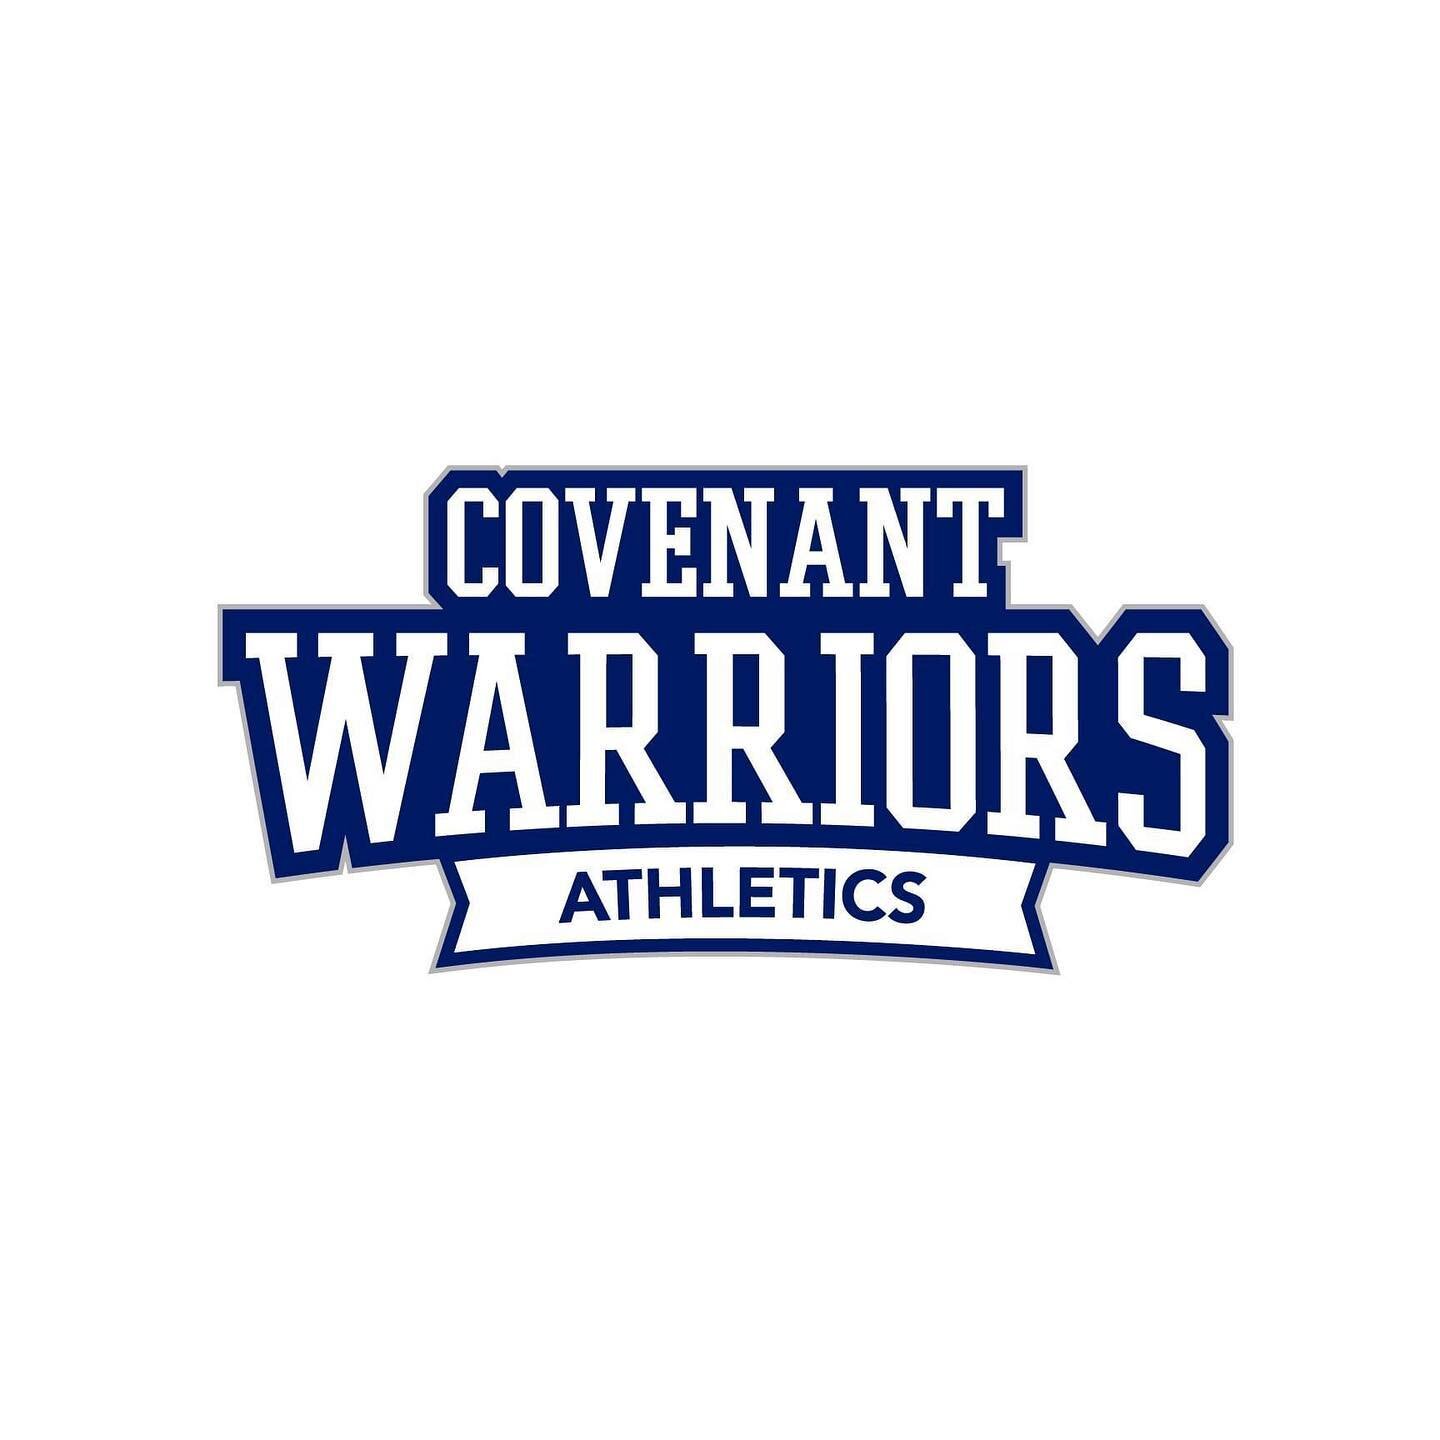 ‼️ Have you seen the new Covenant Warrior⁉️

- - - - -

@covenantjaxwarriors: Covenant's Athletic Director, Zach Worley, revealed a new Warrior identity to our student body last week. 

This new athletics' logo was built to reflect the strength and c